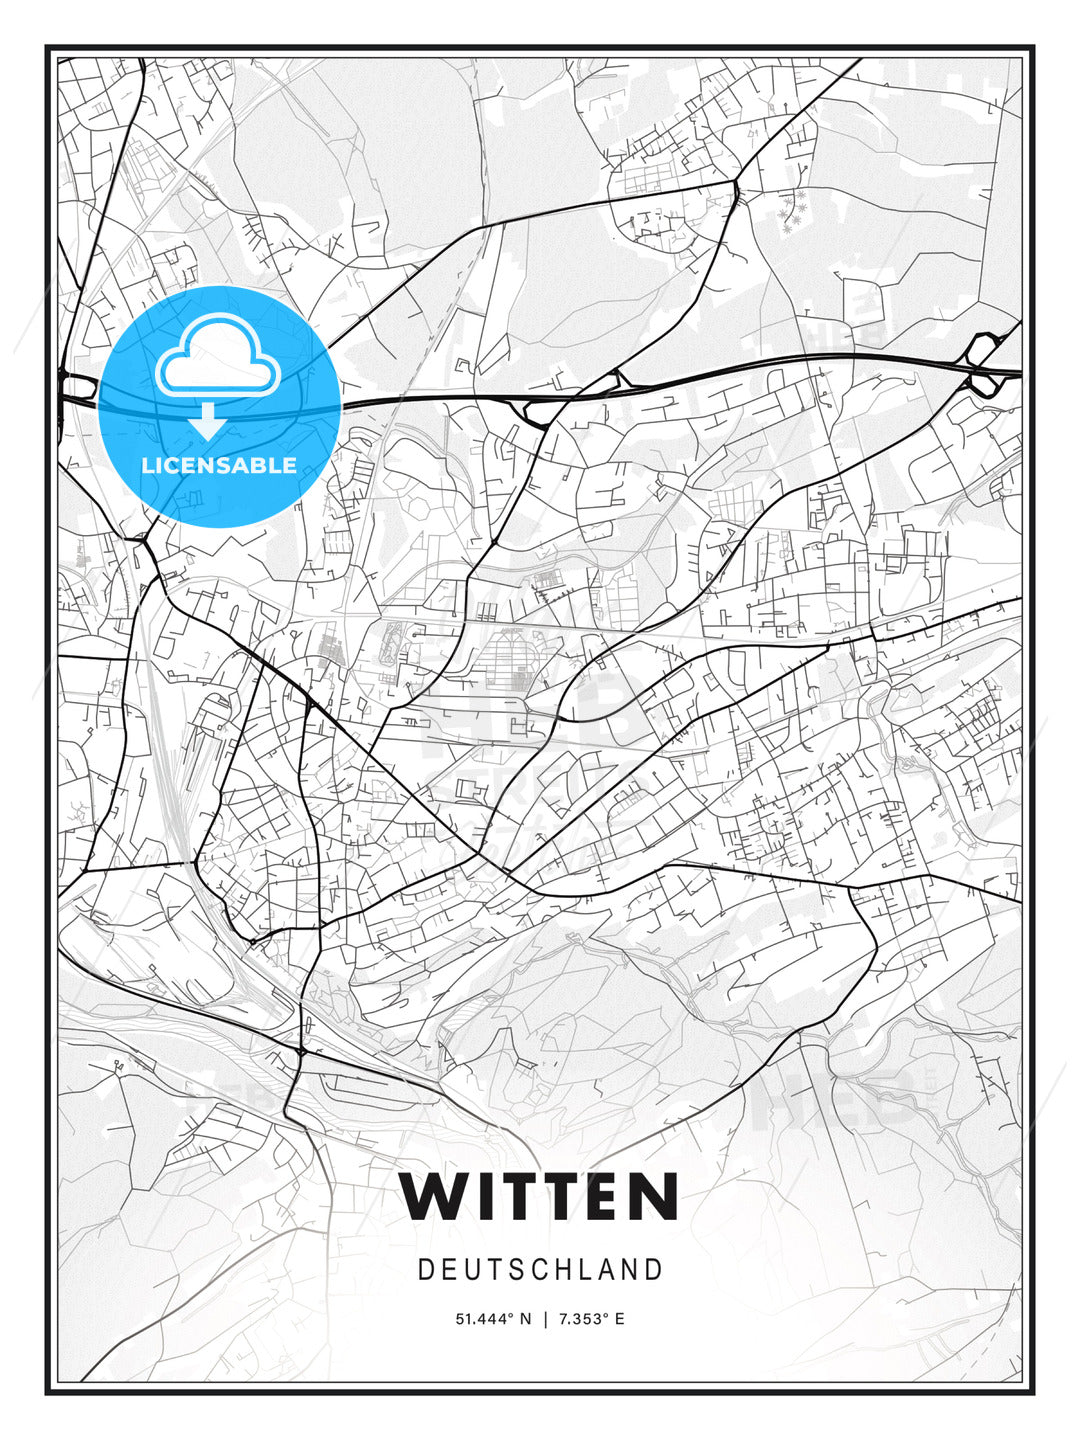 Witten, Germany, Modern Print Template in Various Formats - HEBSTREITS Sketches